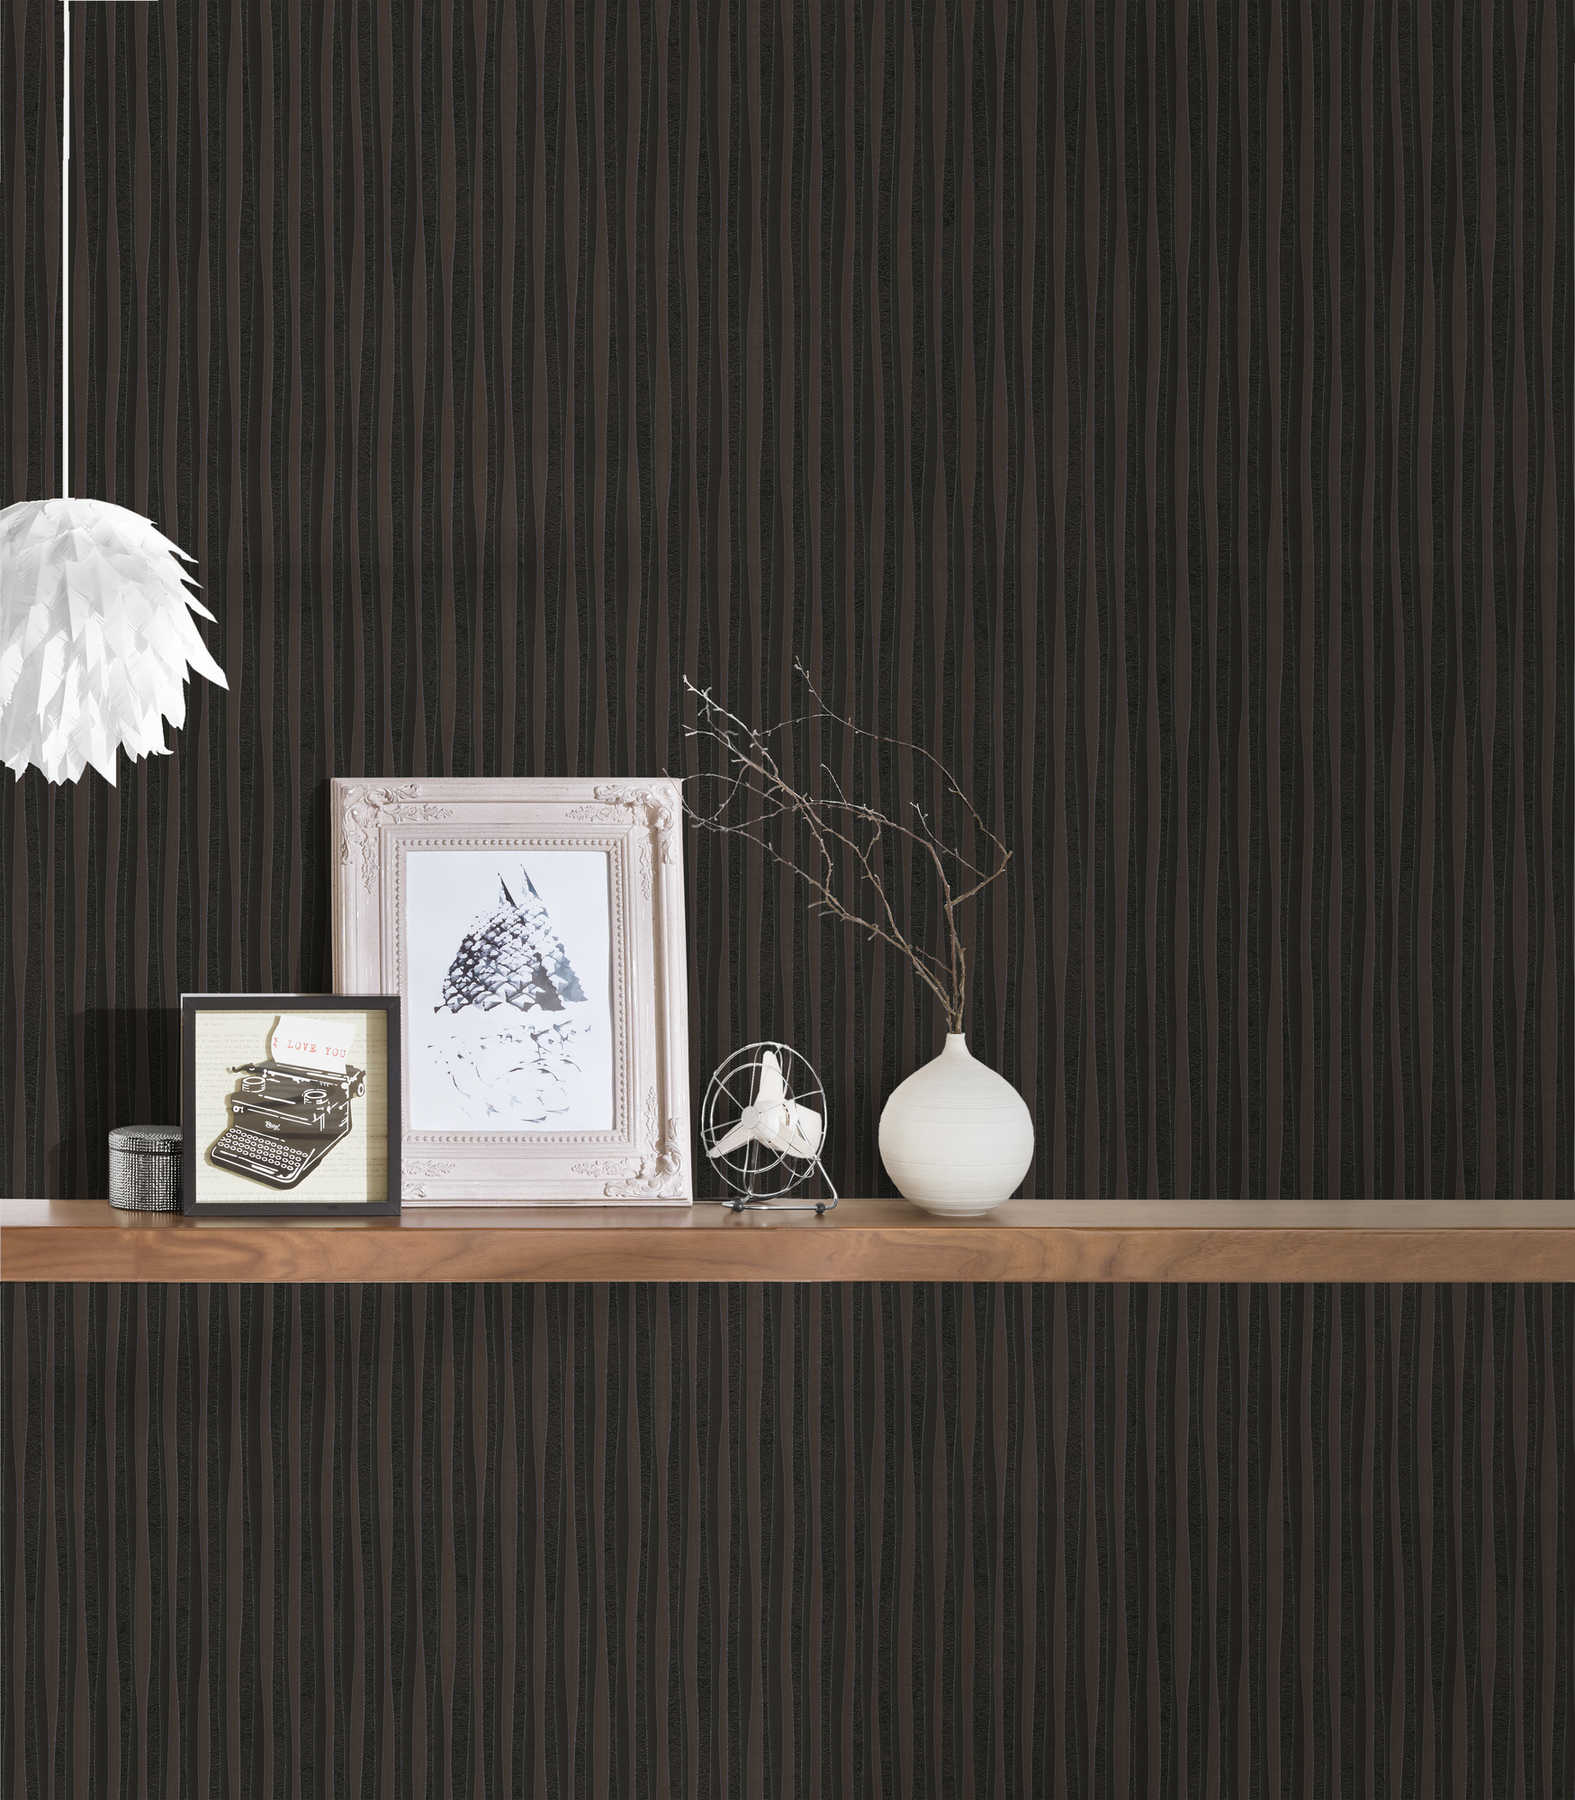             Wallpaper with narrow & moving stripes - brown
        